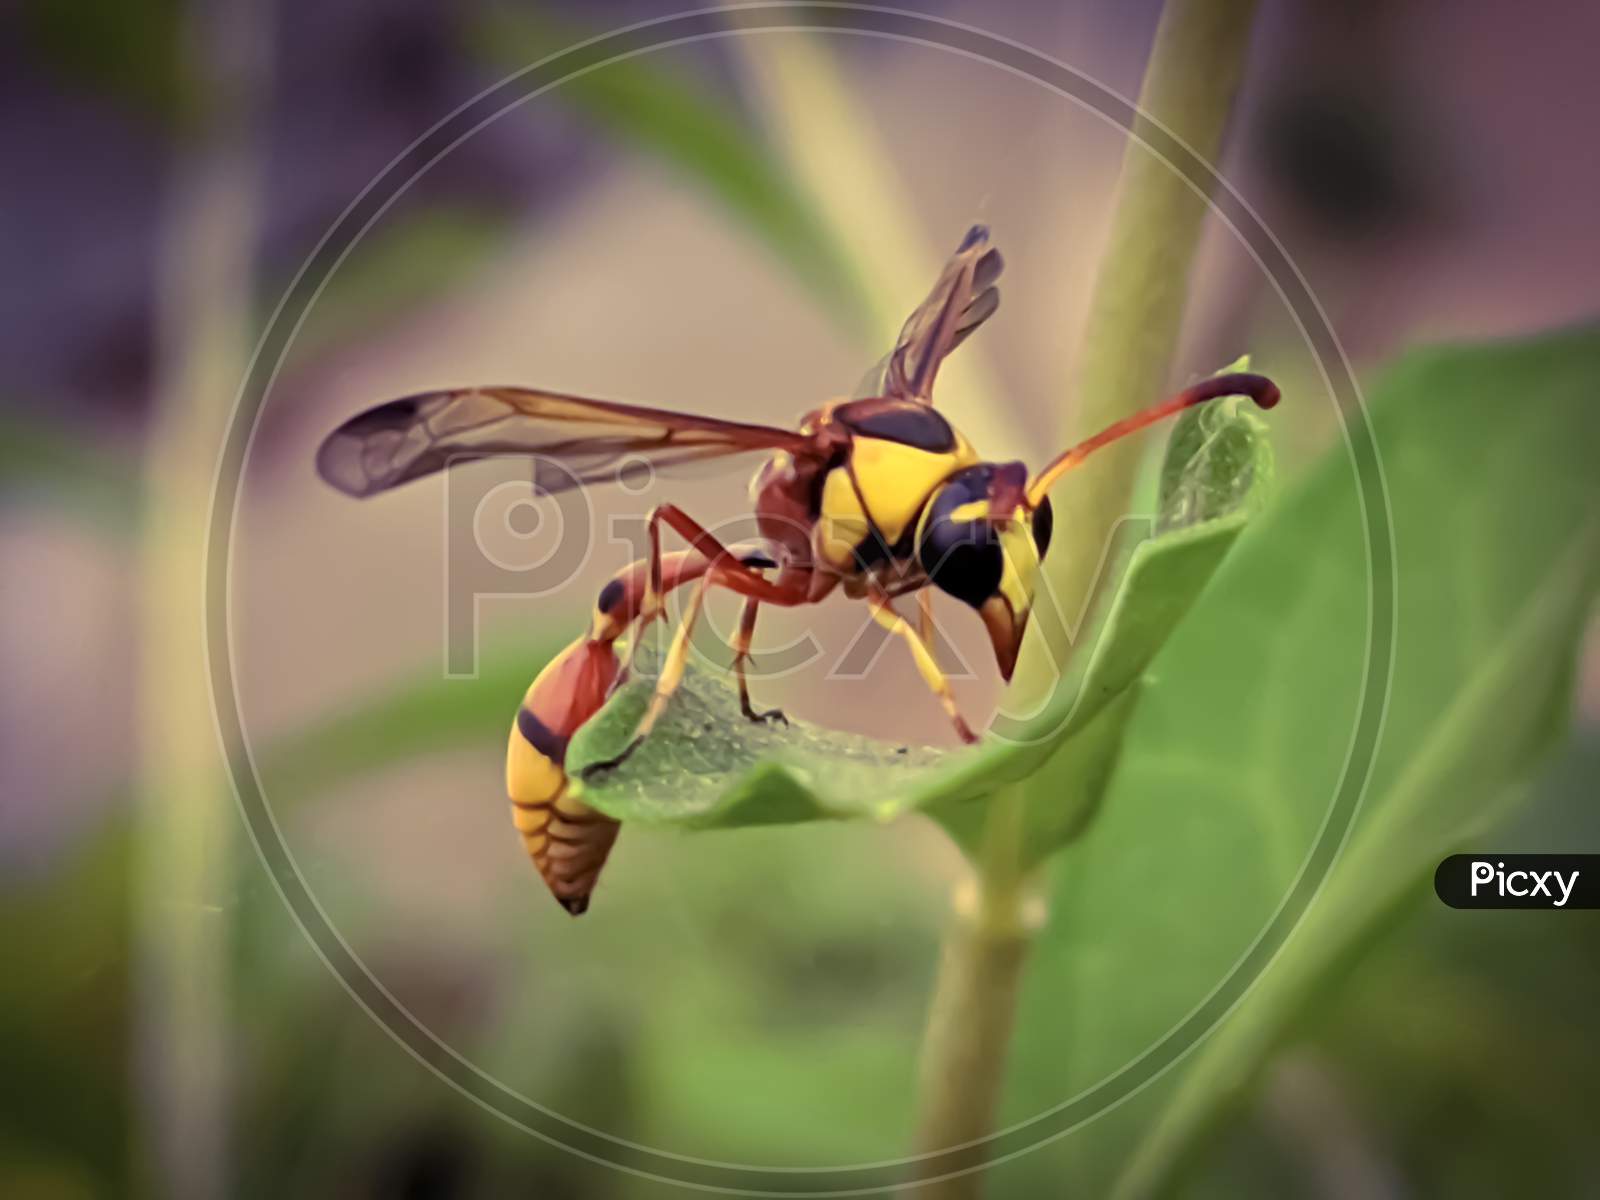 Vespa on leaf garden hornet insect vespa fly yellow bee yellow hornet